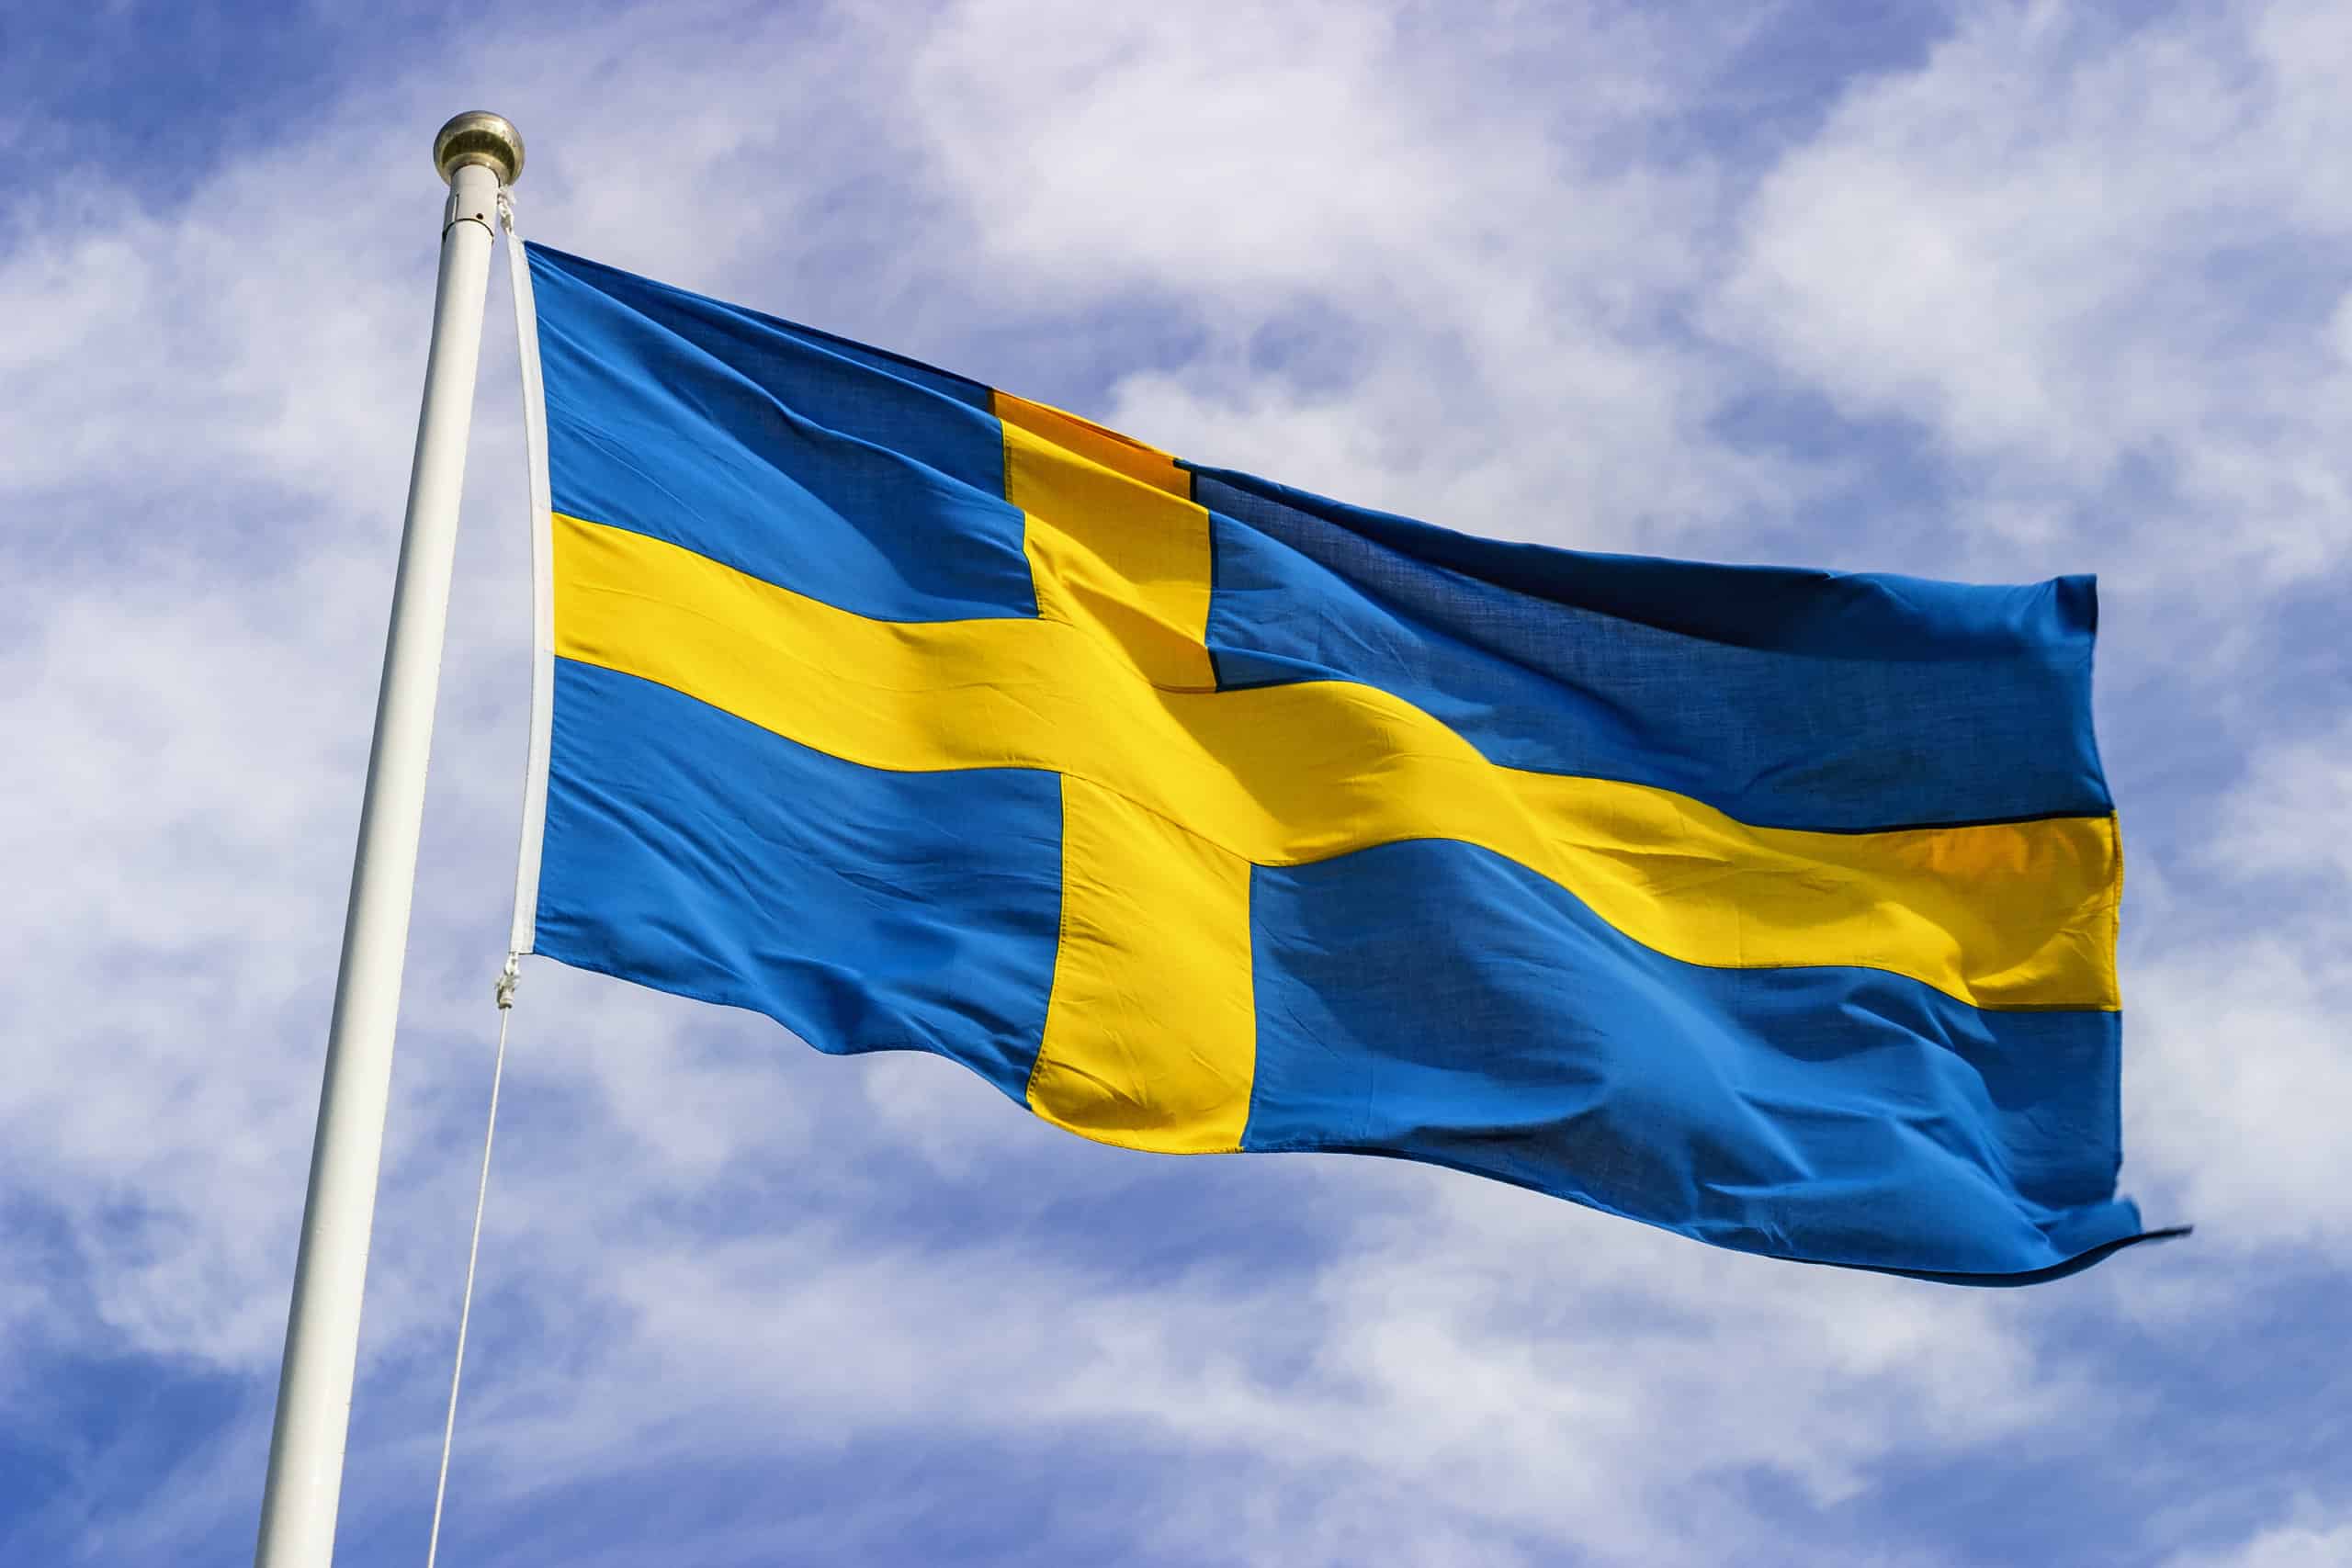 6 Countries With Blue Yellow Flags, Listed - AZ Animals